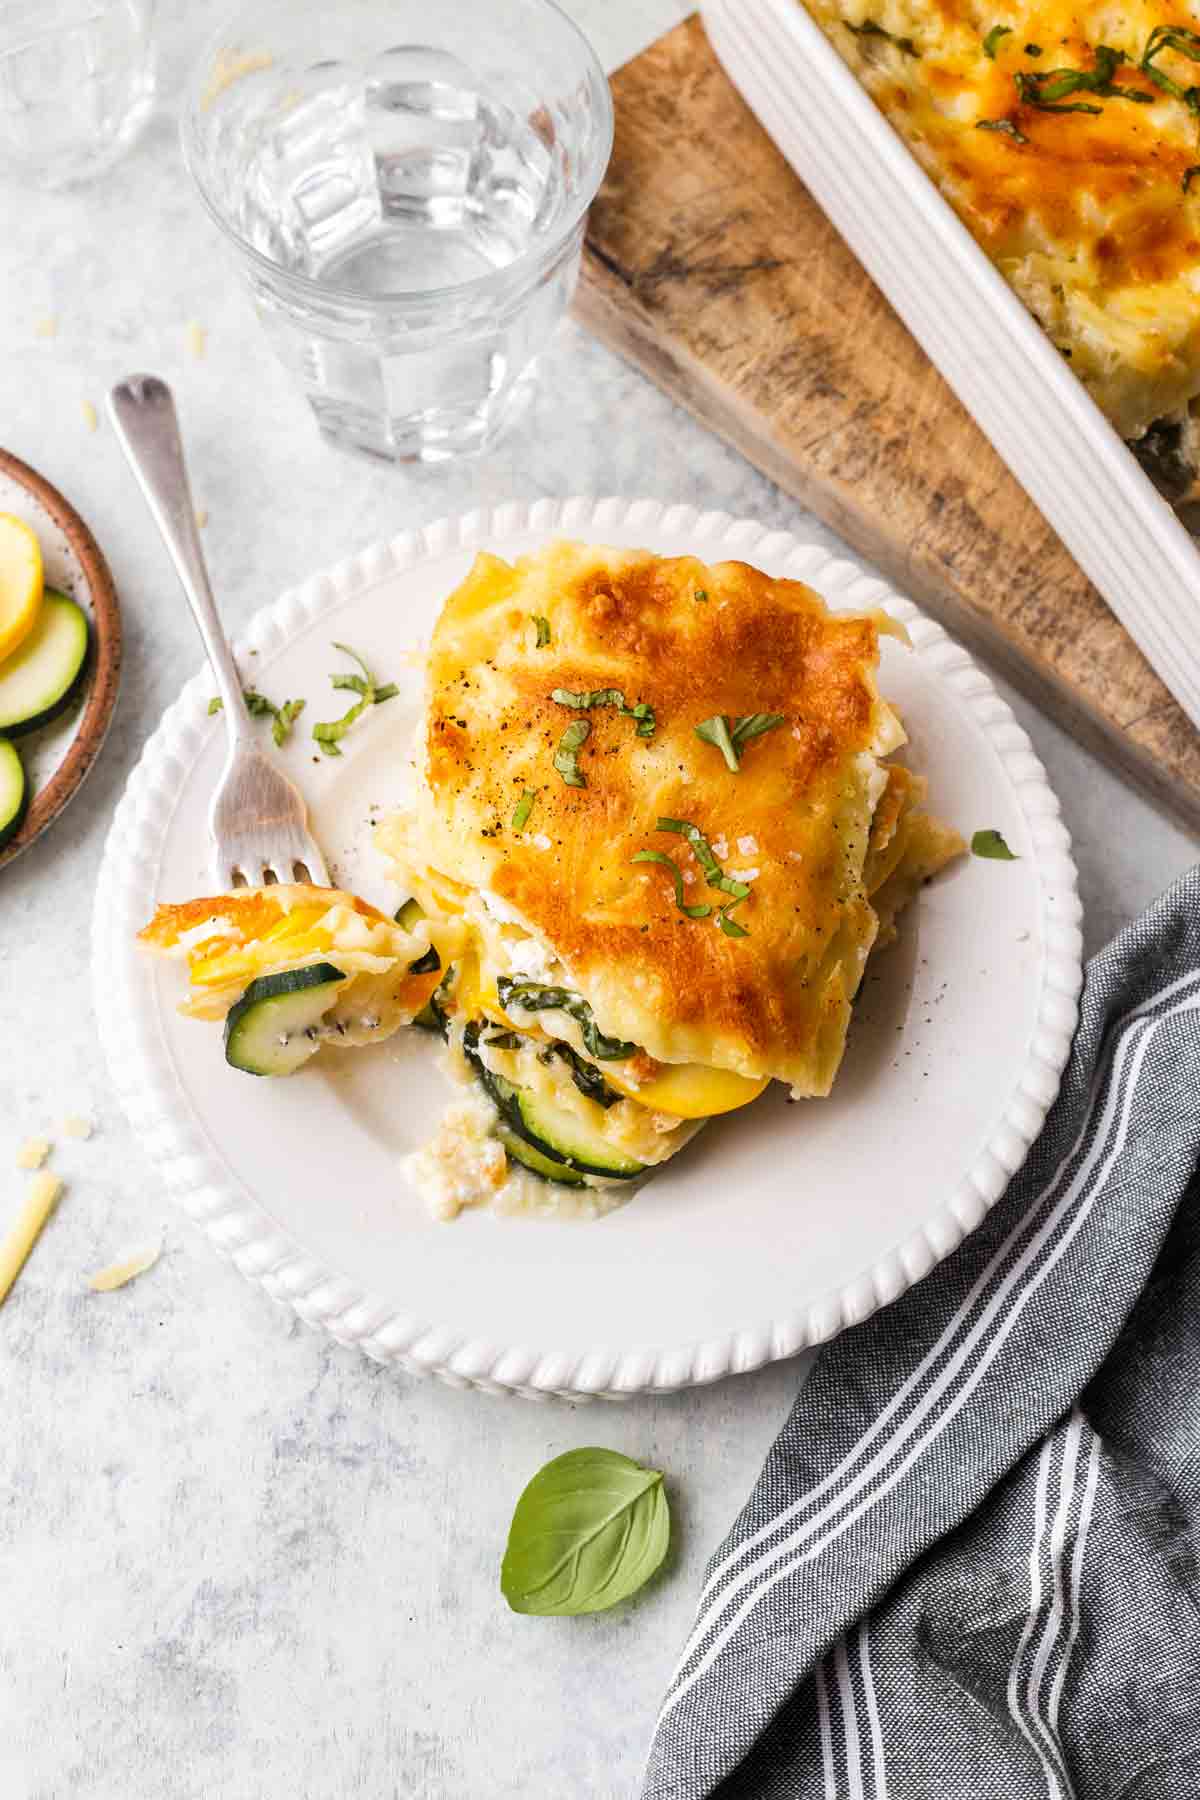 Vegetable Lasagna with Squash, Zucchini and Carrots